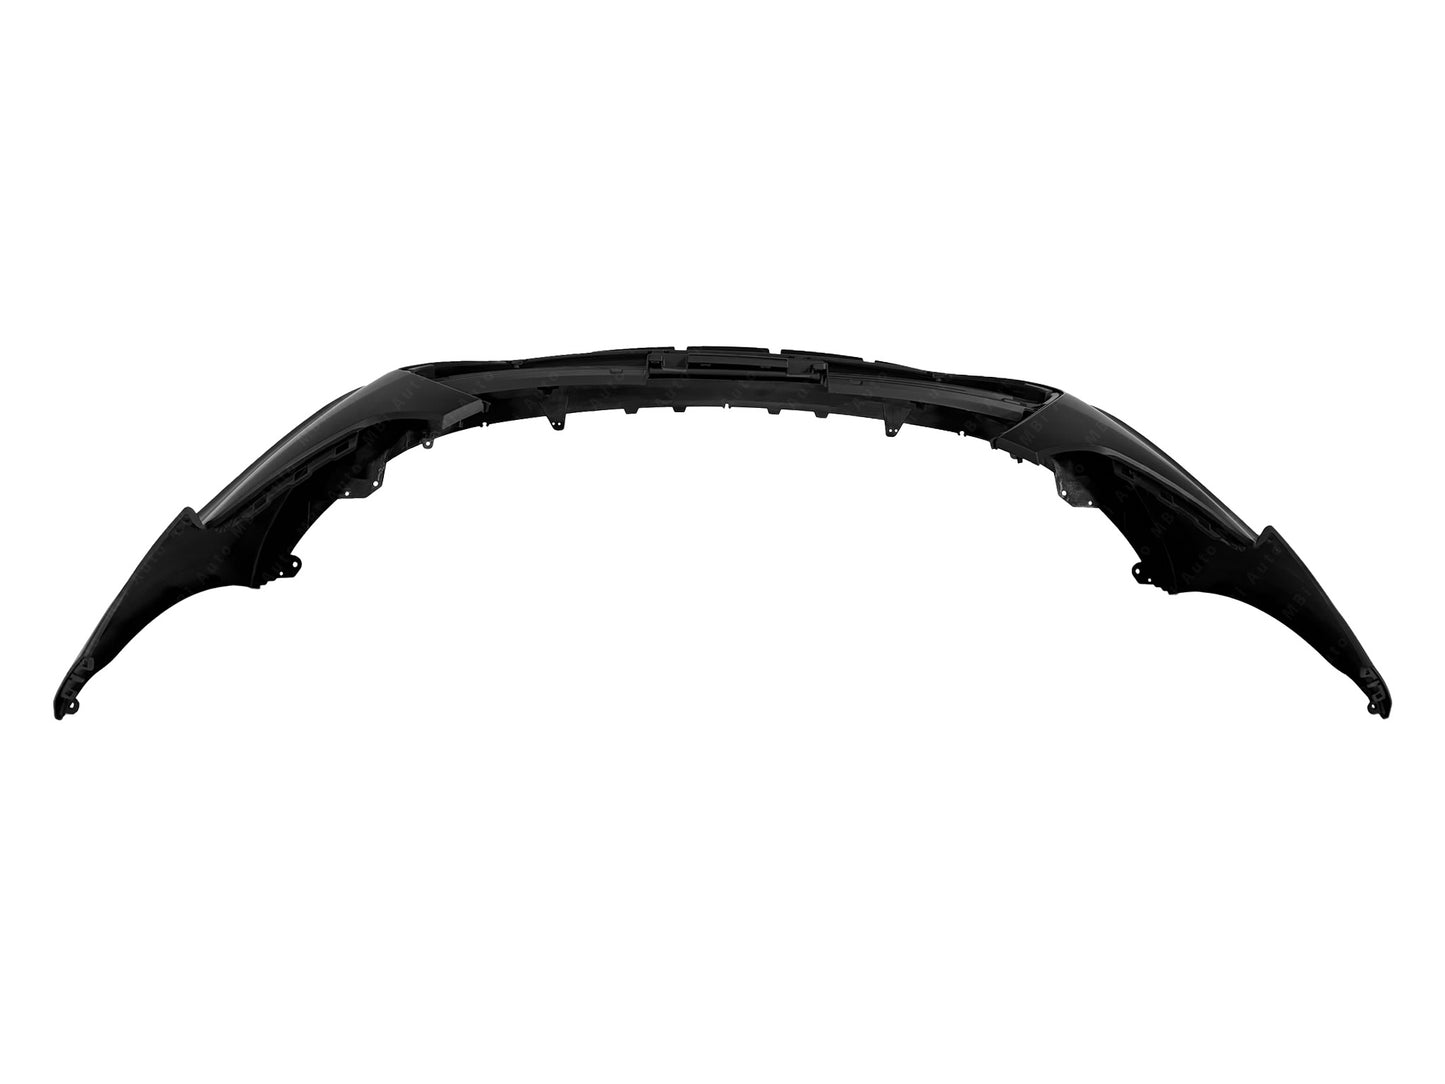 Hyundai Veloster 2013 - 2017 Front Bumper Cover 13 - 17 HY1000194